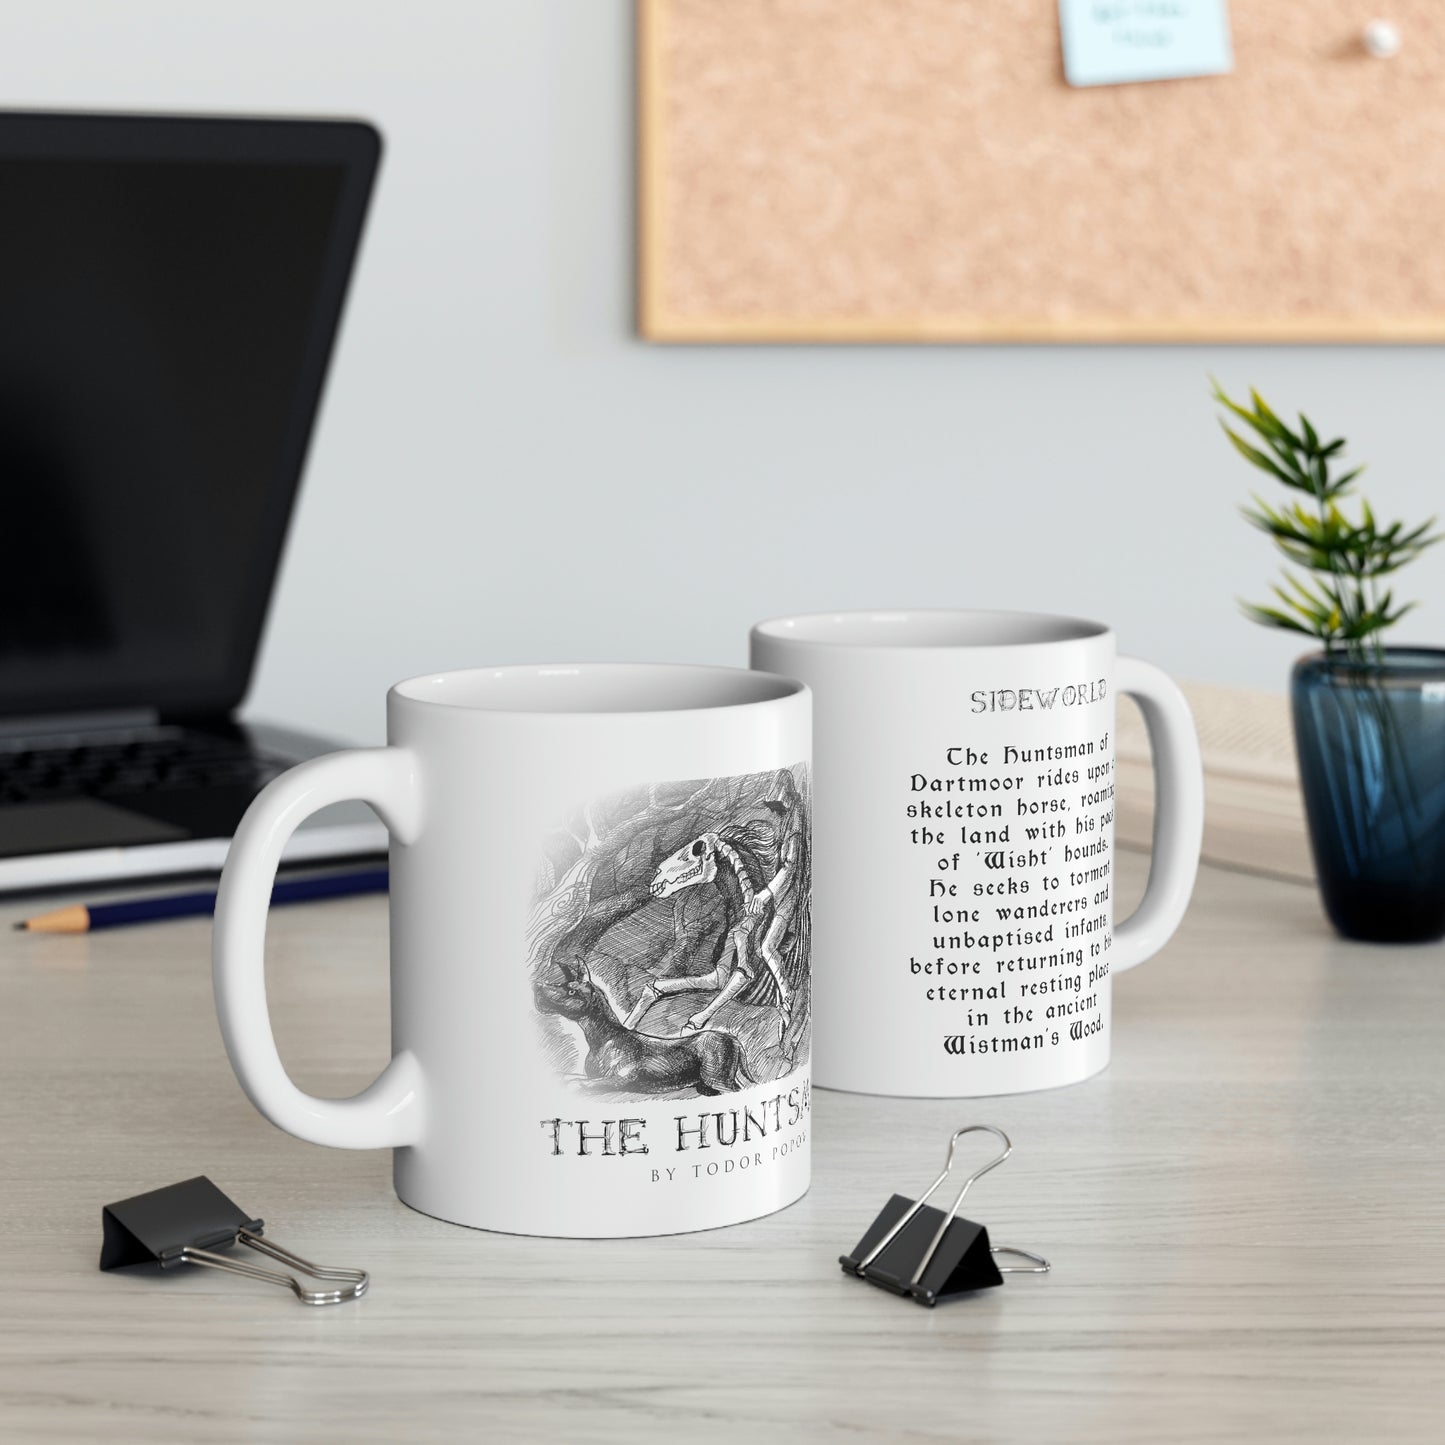 A folk horror mug of original art of the folkloric character The Huntsman of Dartmoor by Bulgarian Artist Todor Popov. With a horror summary of the folklore behind the character.